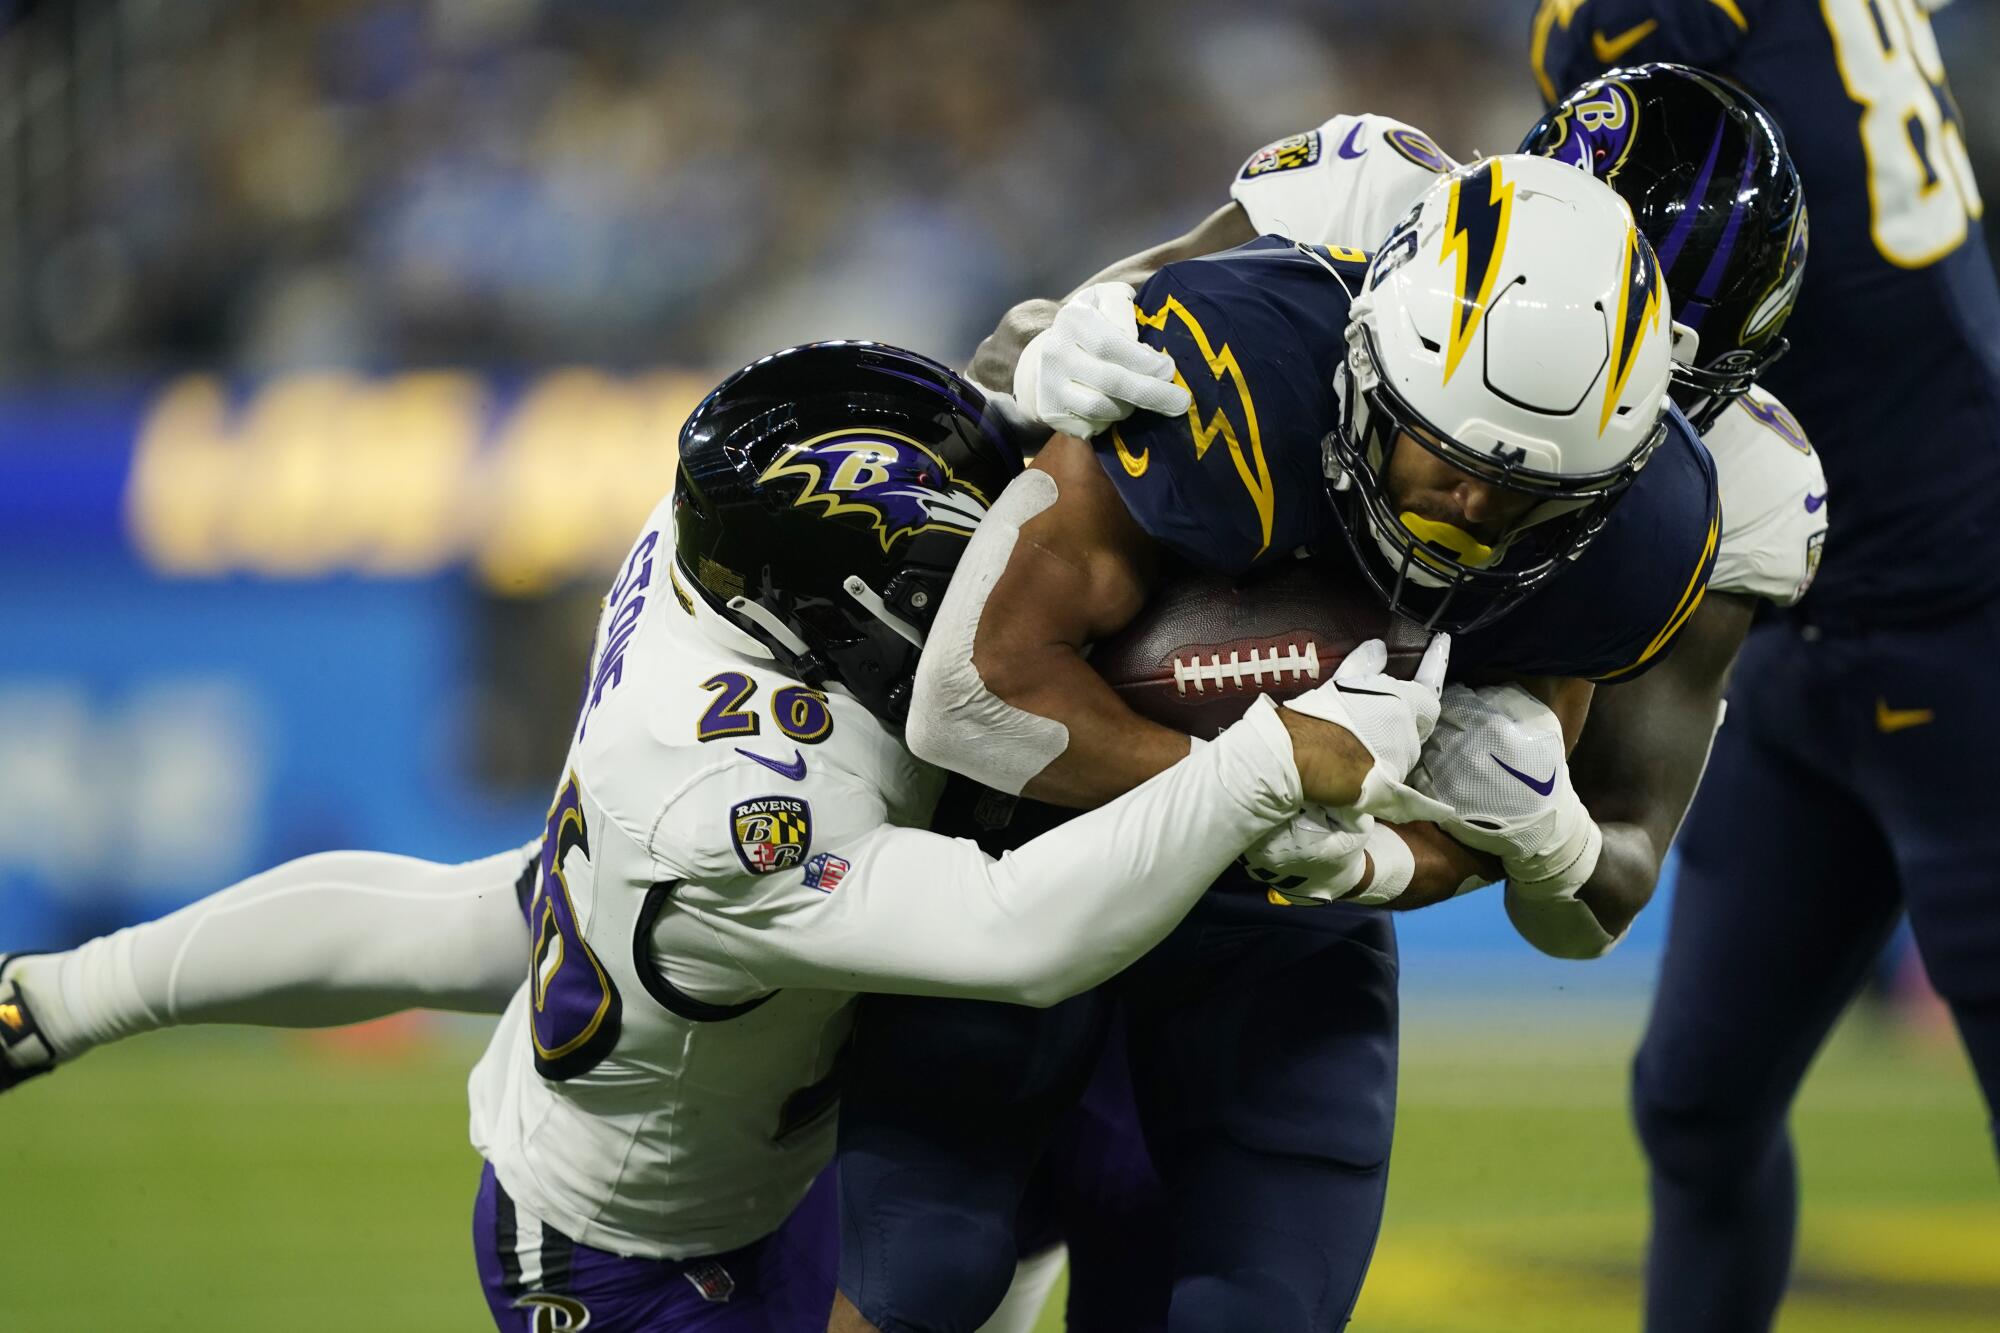 Chargers running back Austin Ekeler is tackled by Ravens safety Geno Stone and linebacker Patrick Queen 